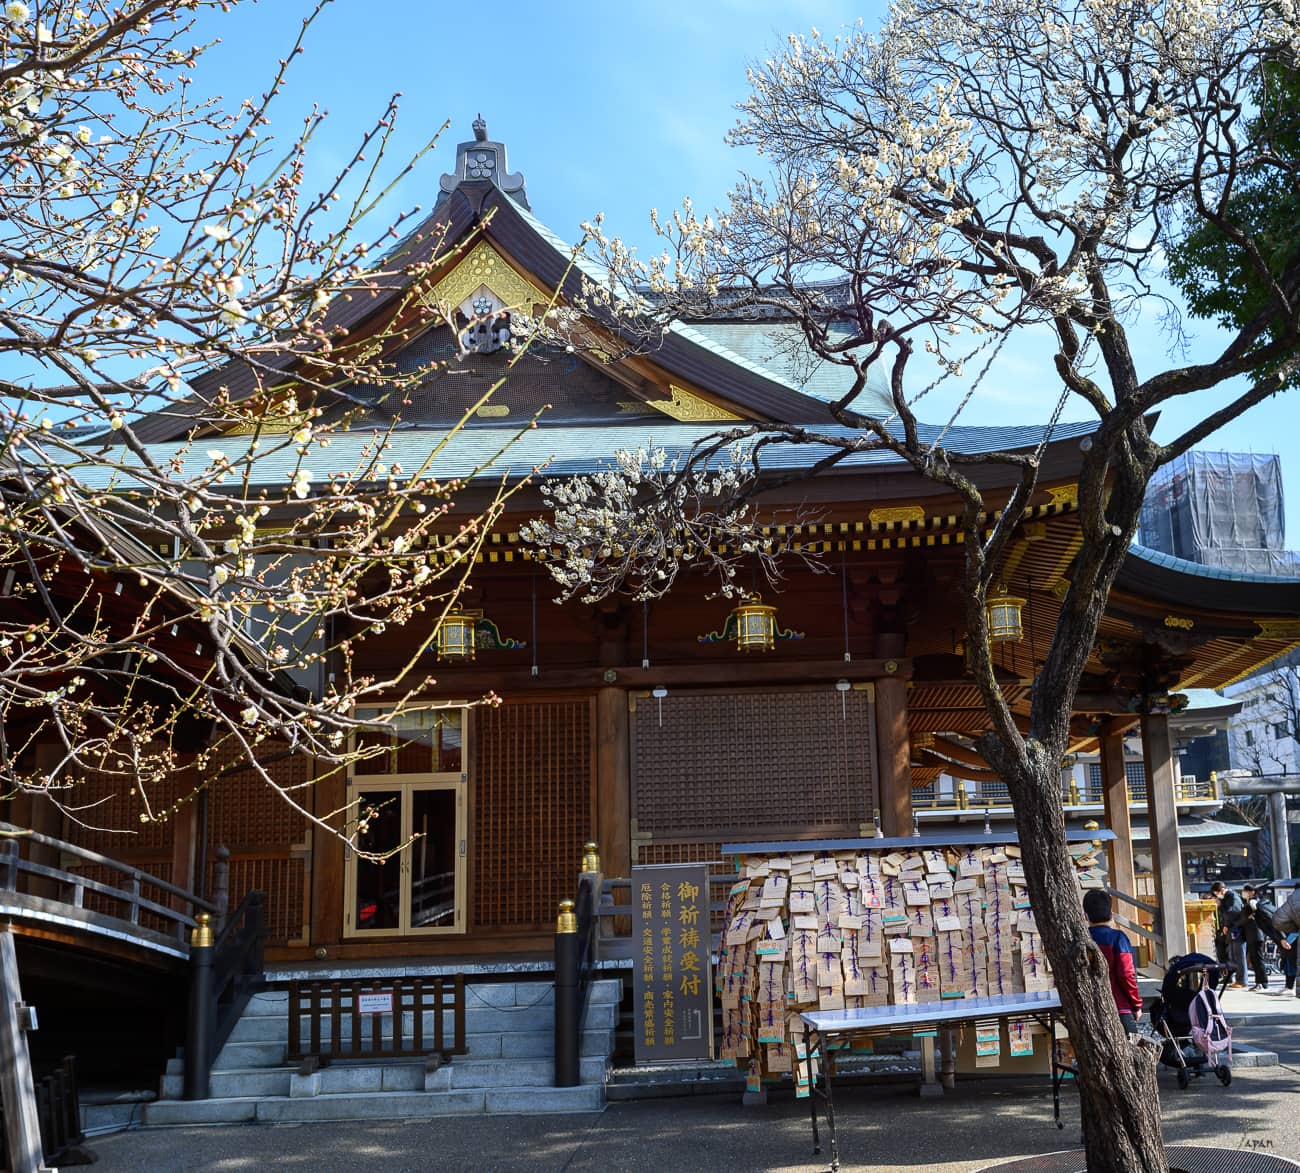 One of the best places to see plum blosoms in tokyo, Yushima Tenjin Shrine